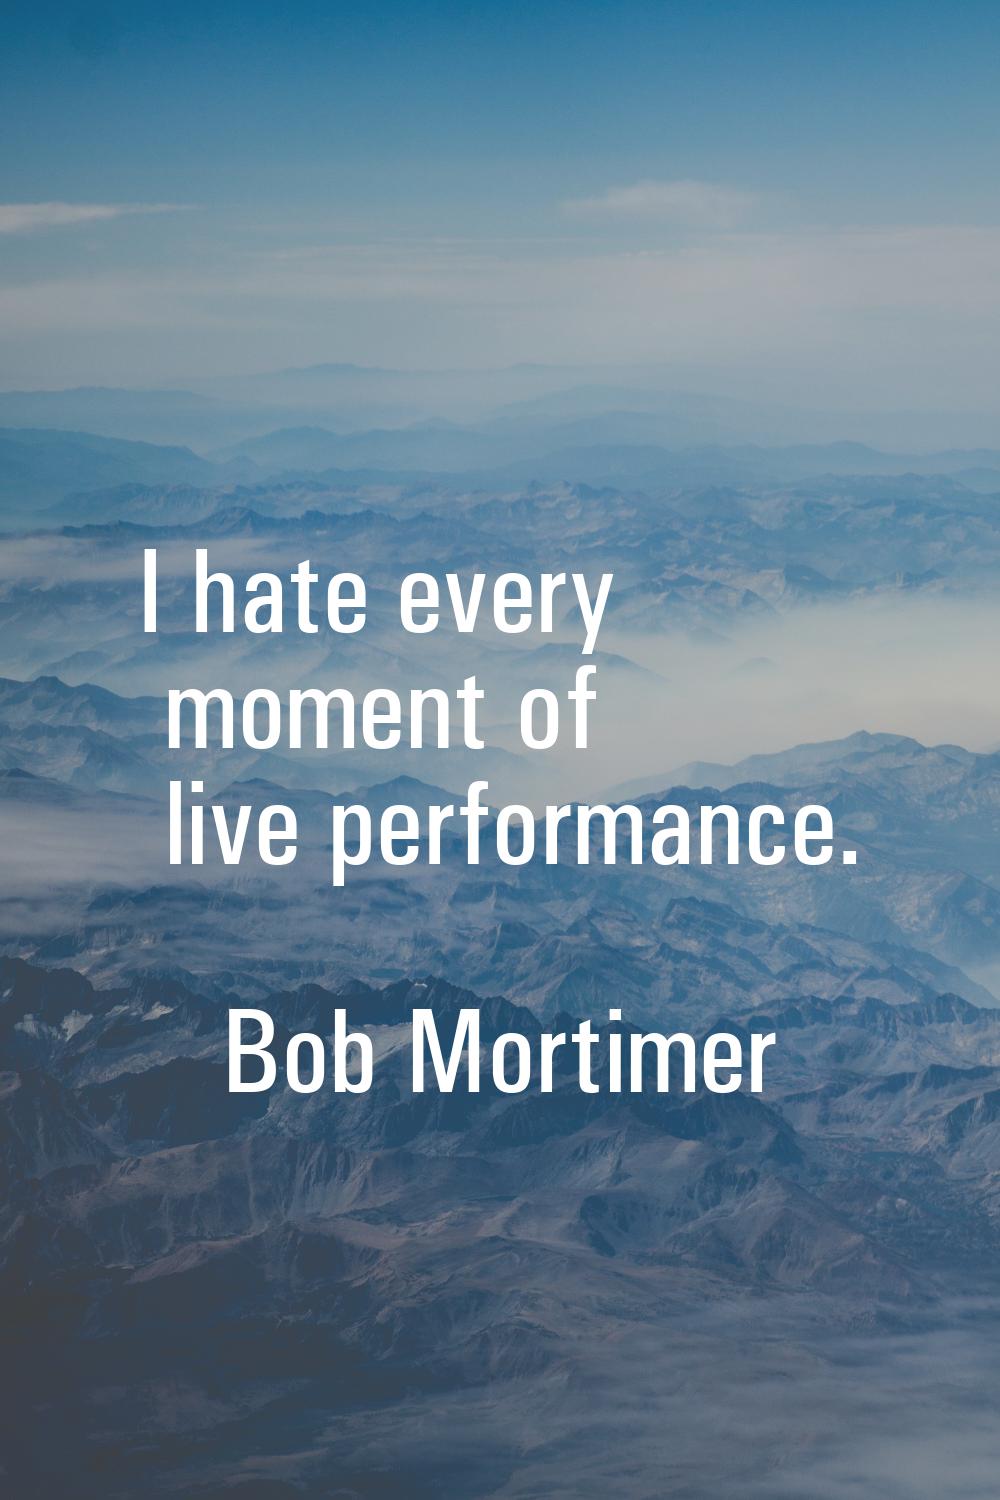 I hate every moment of live performance.